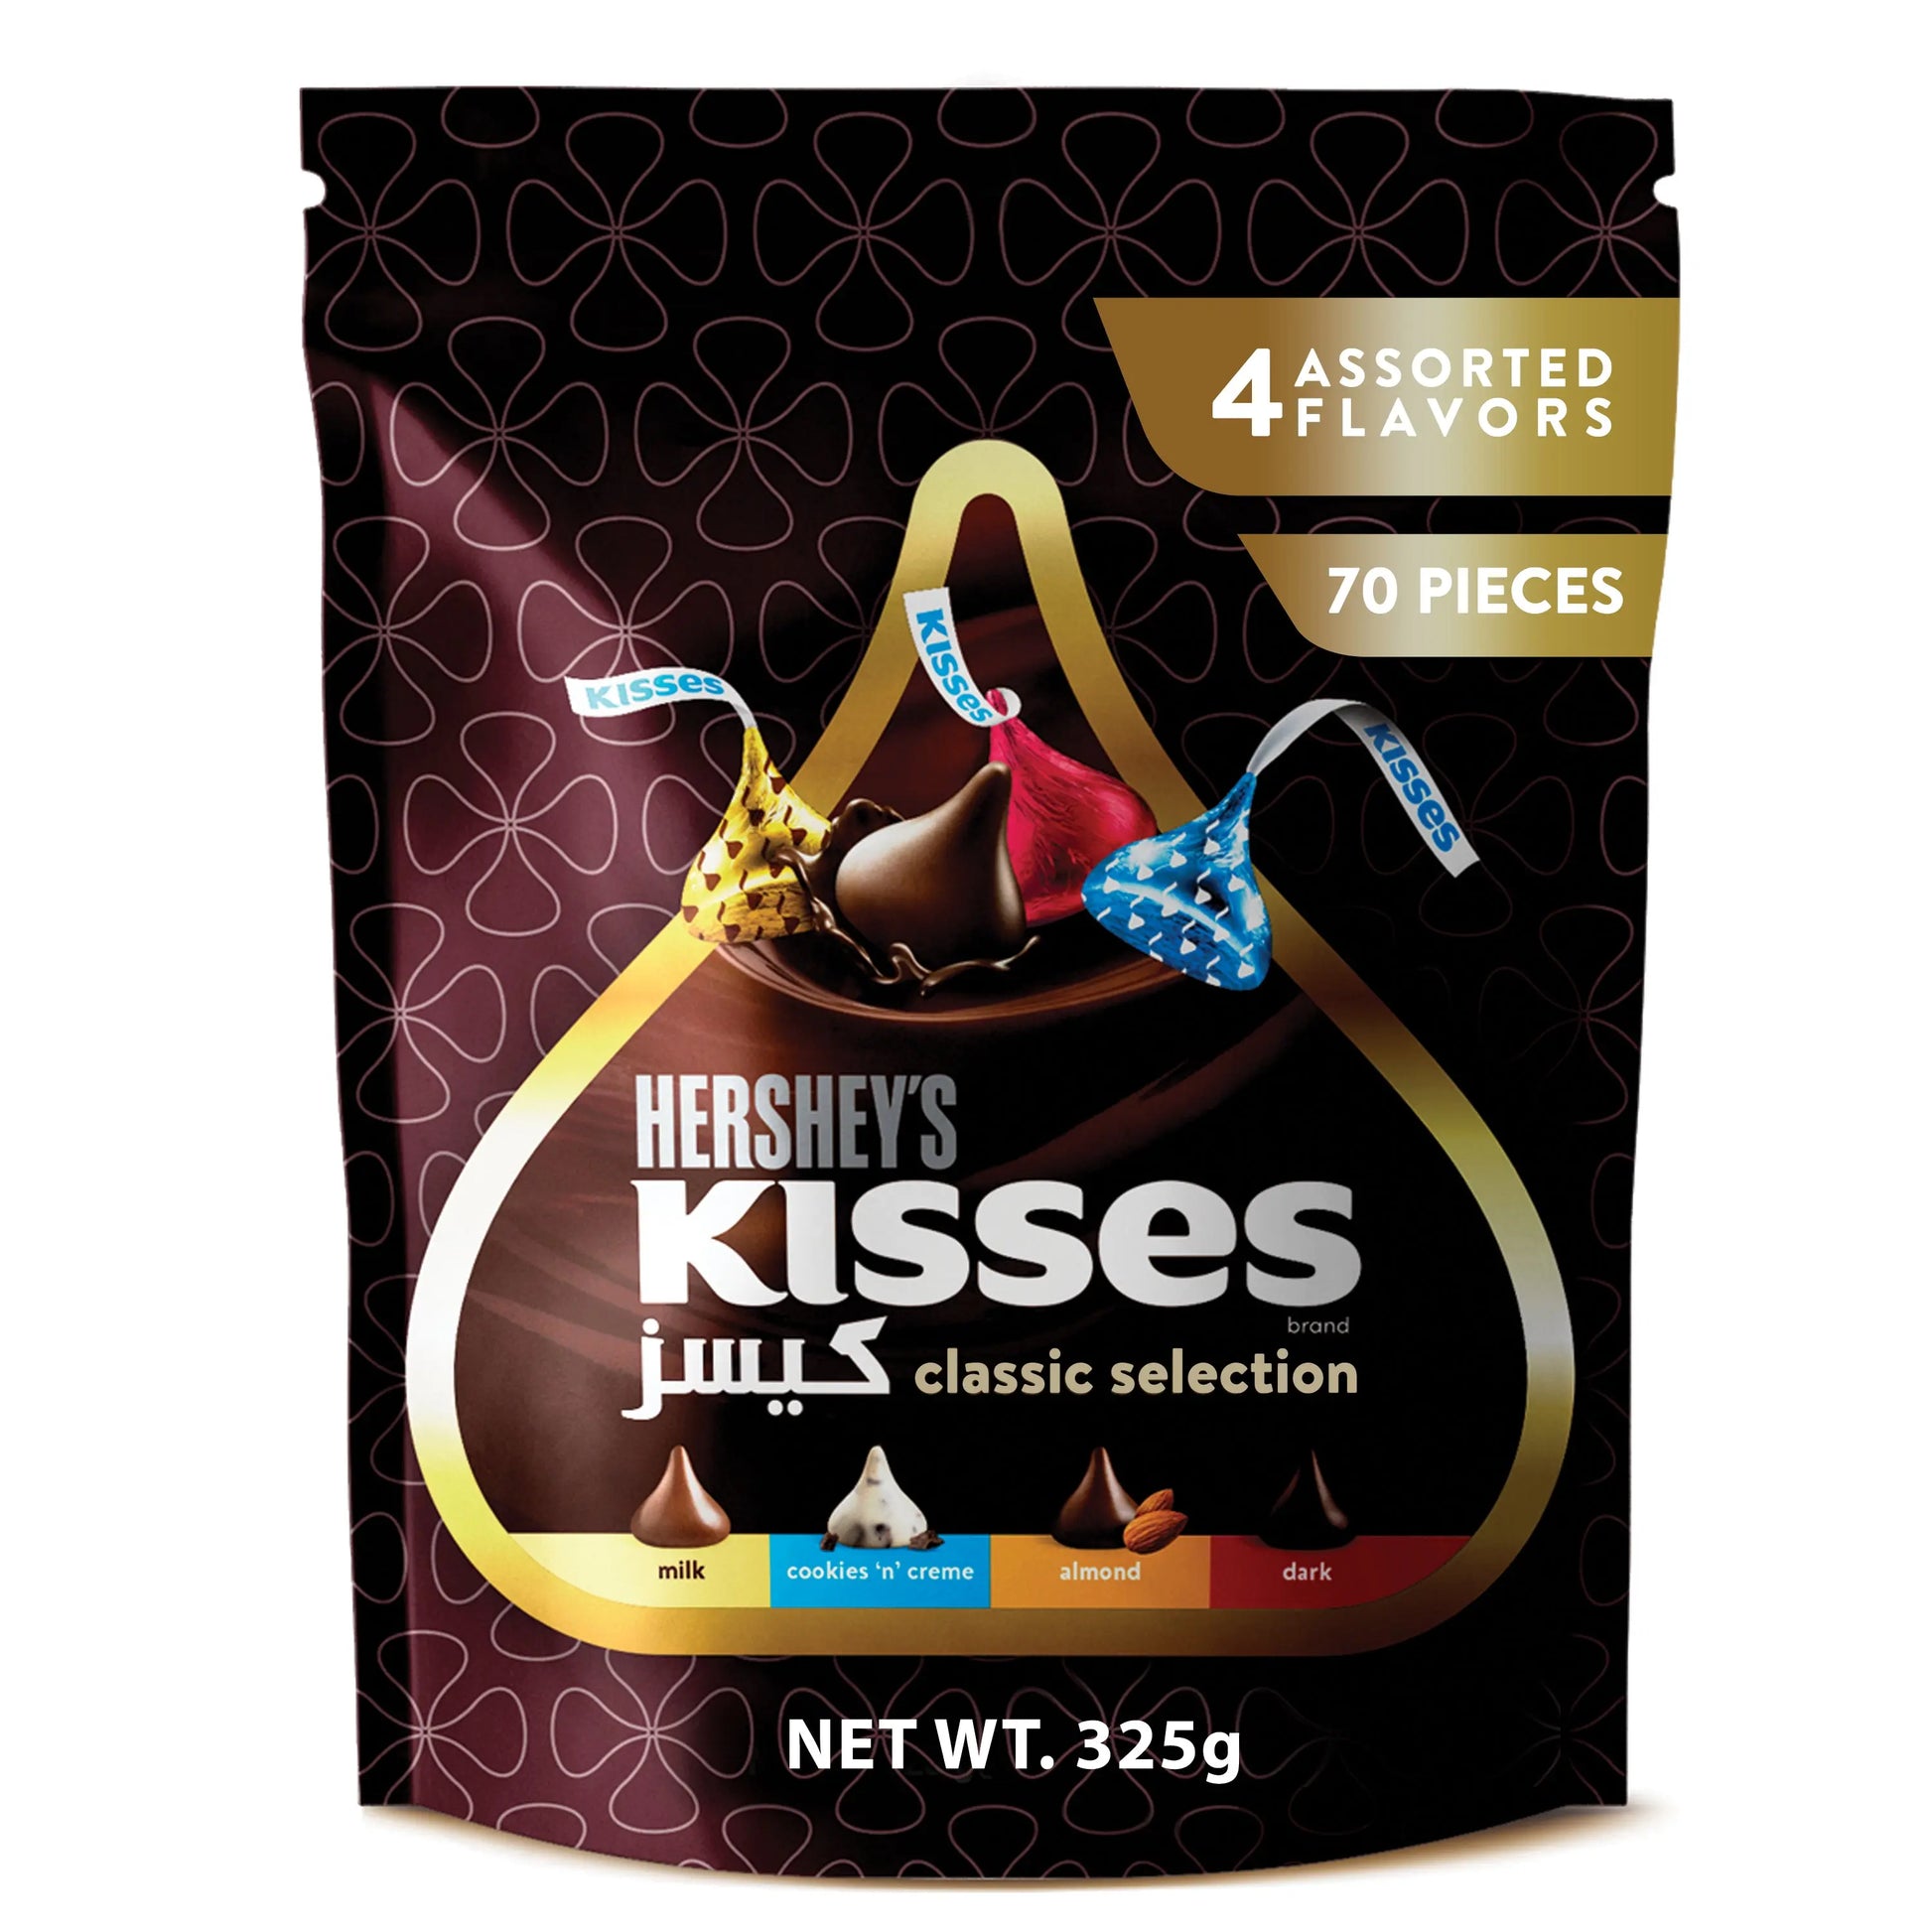 Hershey's Kisses Assorted Classic Selection 325gm Kisses